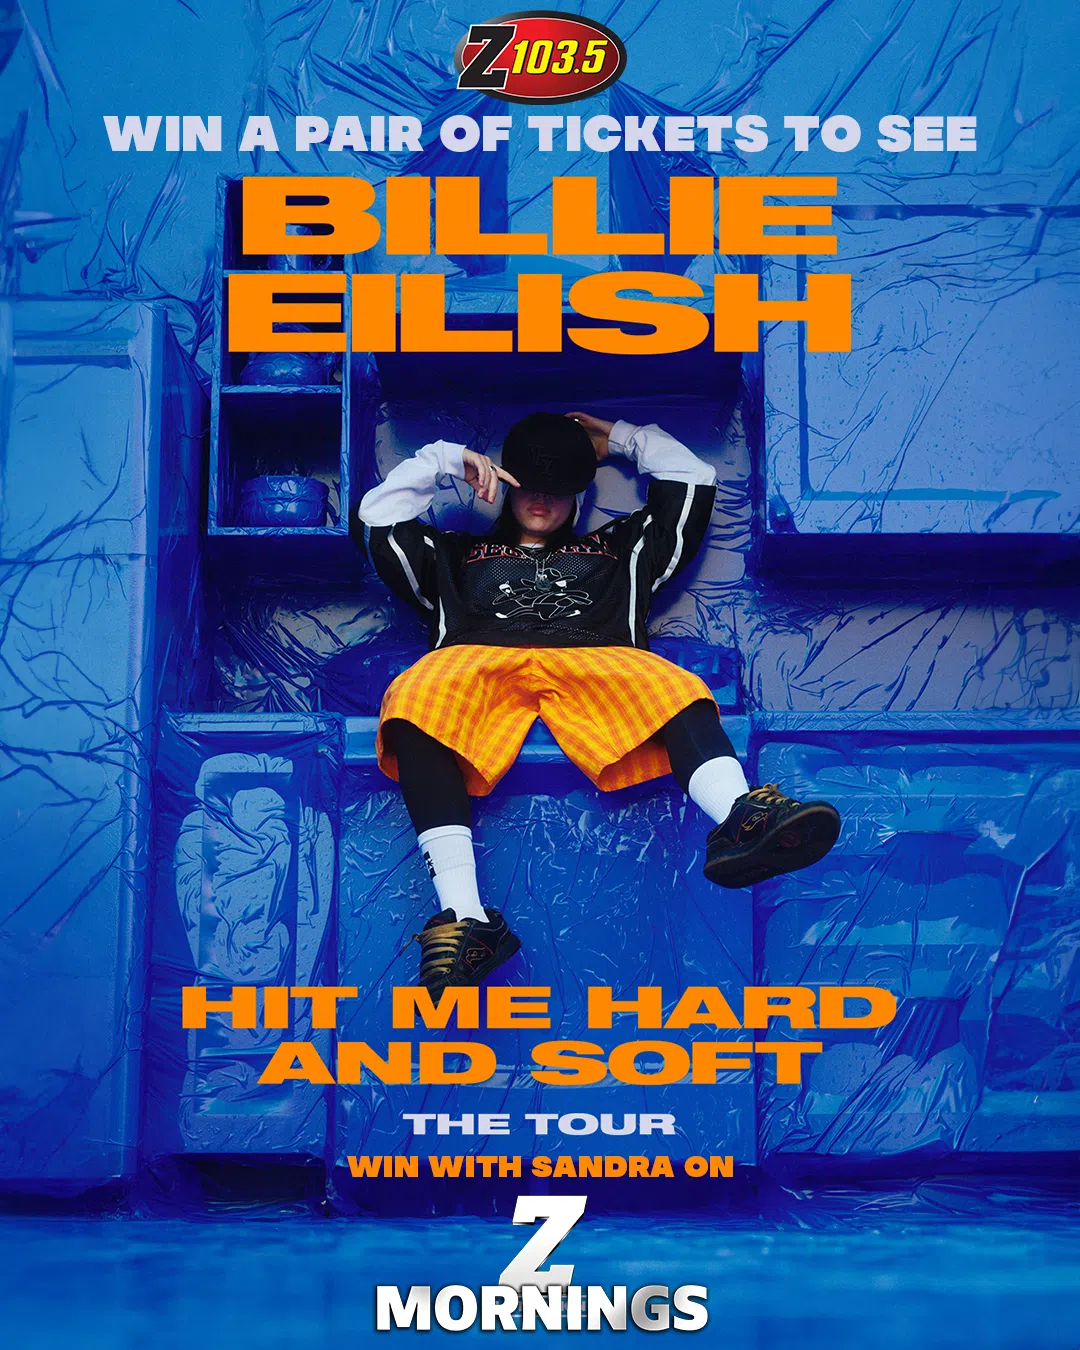 Feature: https://z1035.com/win/win-tickets-to-see-billie-eilish/